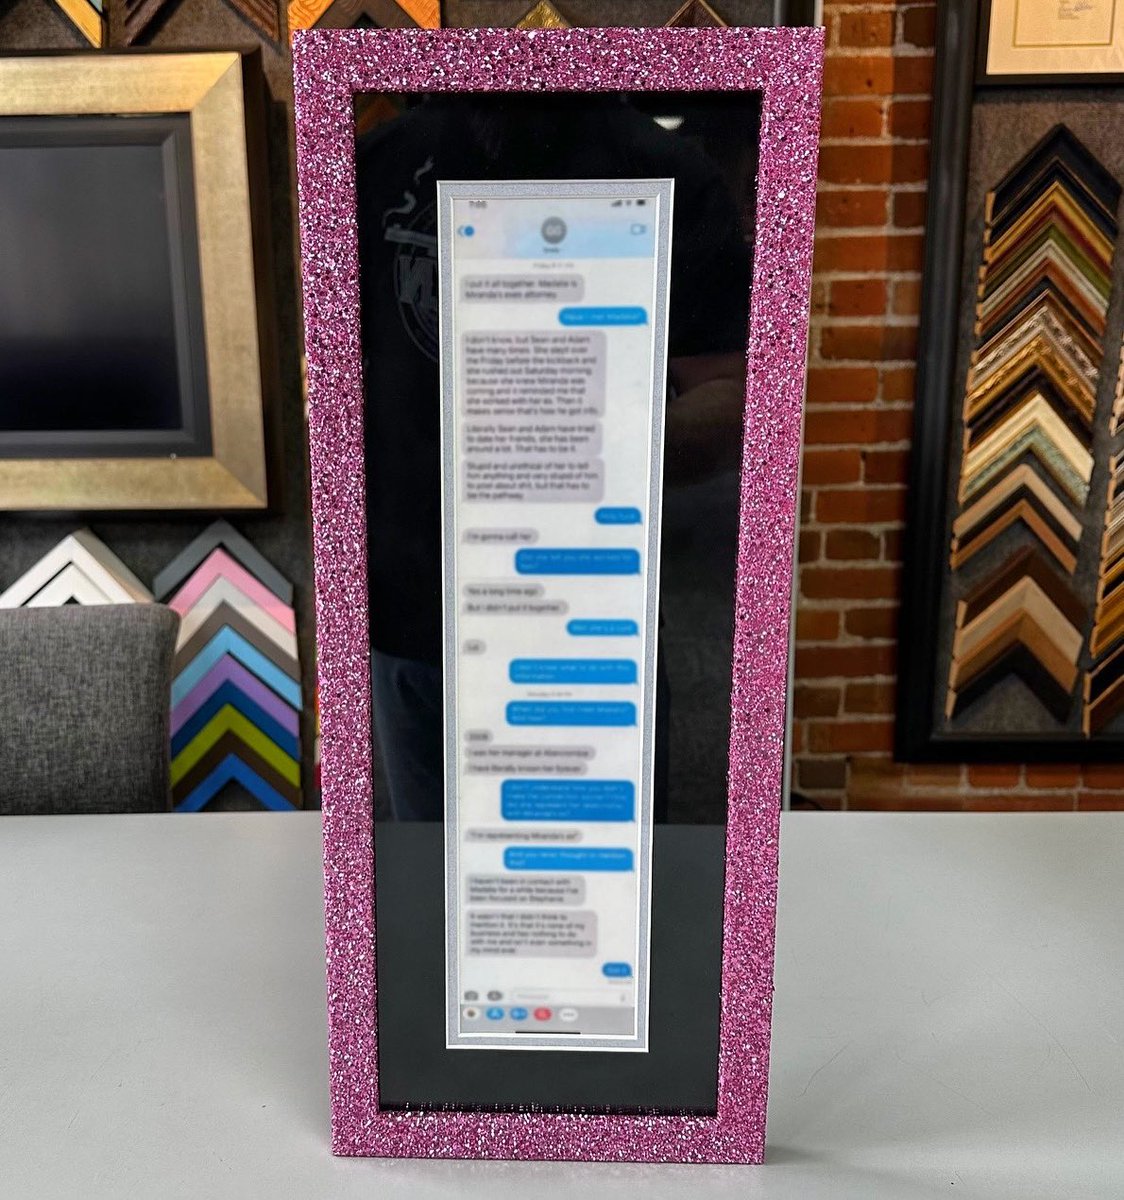 📱Yes, we can even frame your text messages! This text chain was custom framed using metallic and suede matting, museum glass and glitter frame by @BellaMoulding! #art #denver #colorado #pictureframing #customframing #5280customframing #textmessage #glitter @truvueglazing